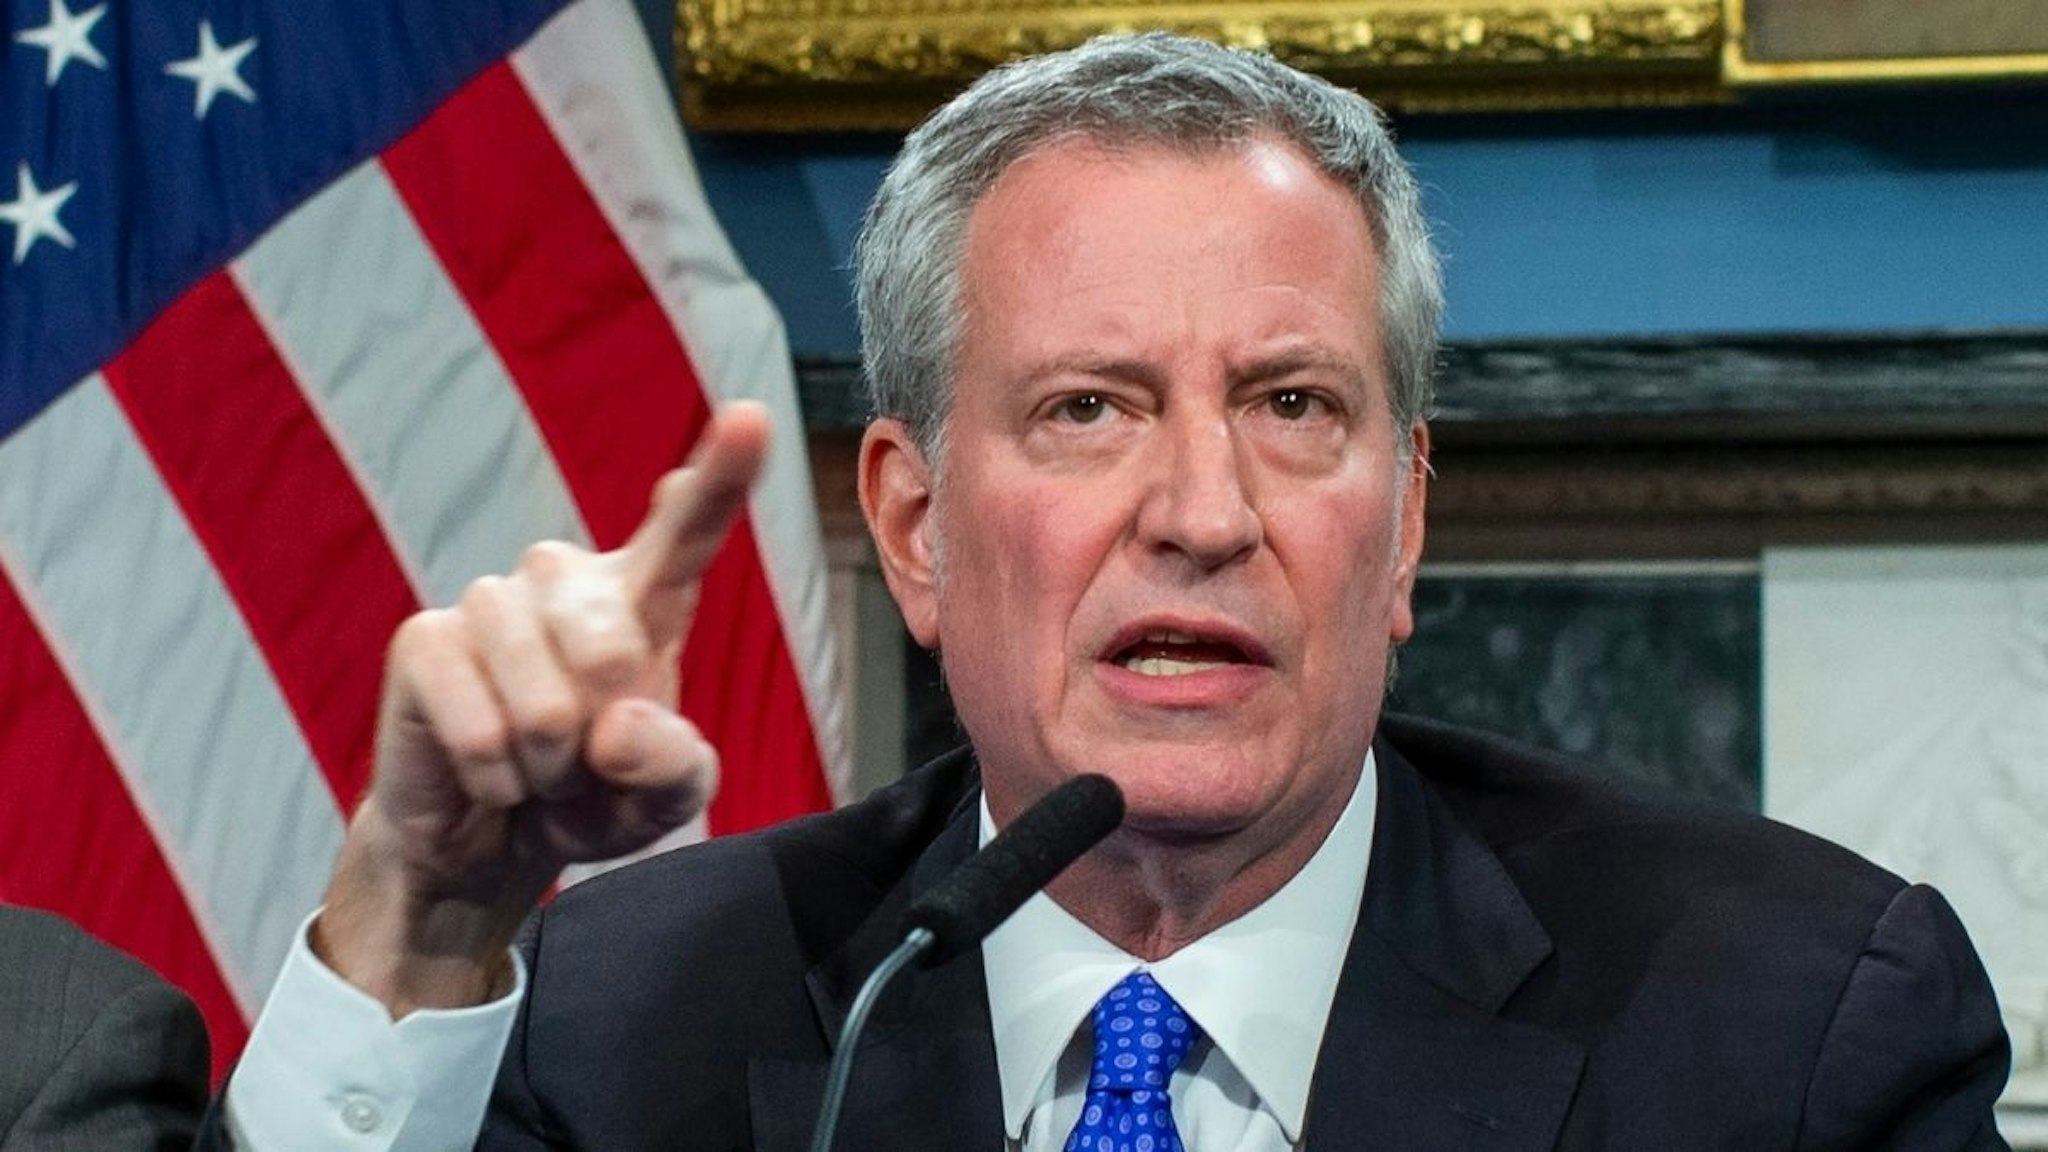 New York Mayor Bill de Blasio speaks to the media during a press conference at City Hall on January 3, 2020 in New York City.